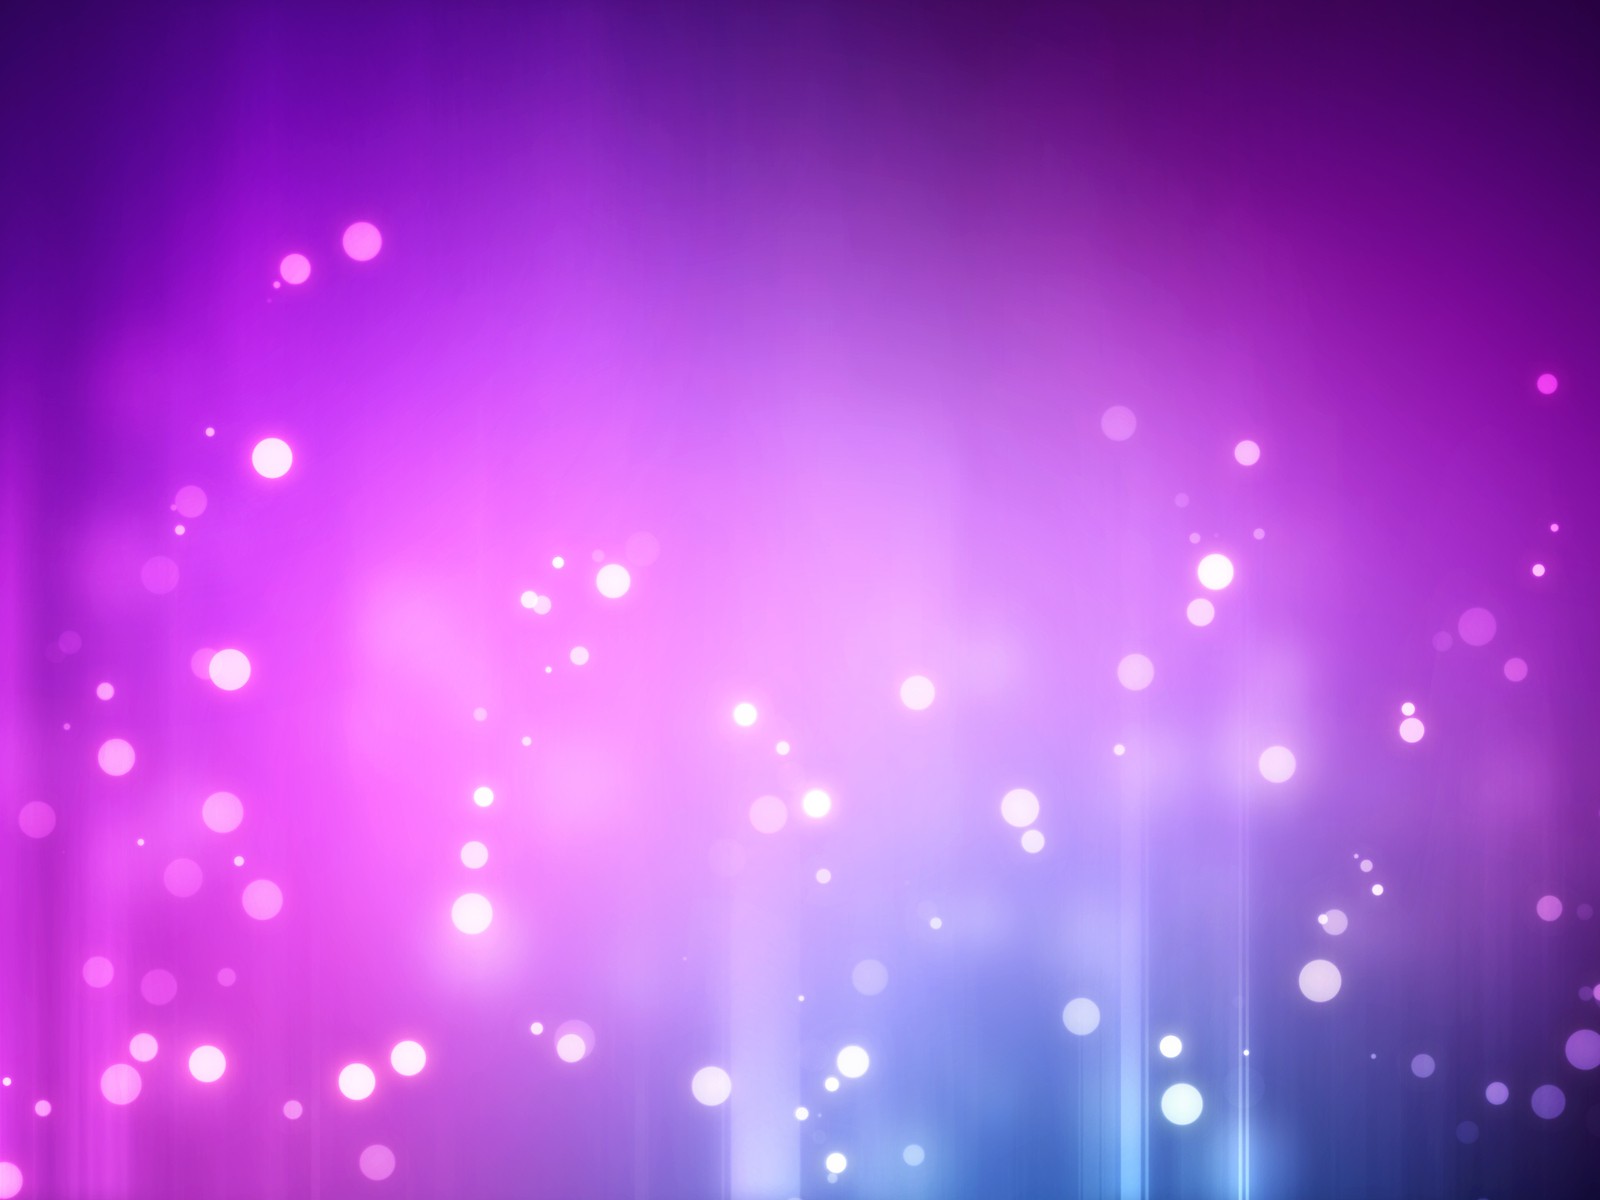 Droplets on a purple background